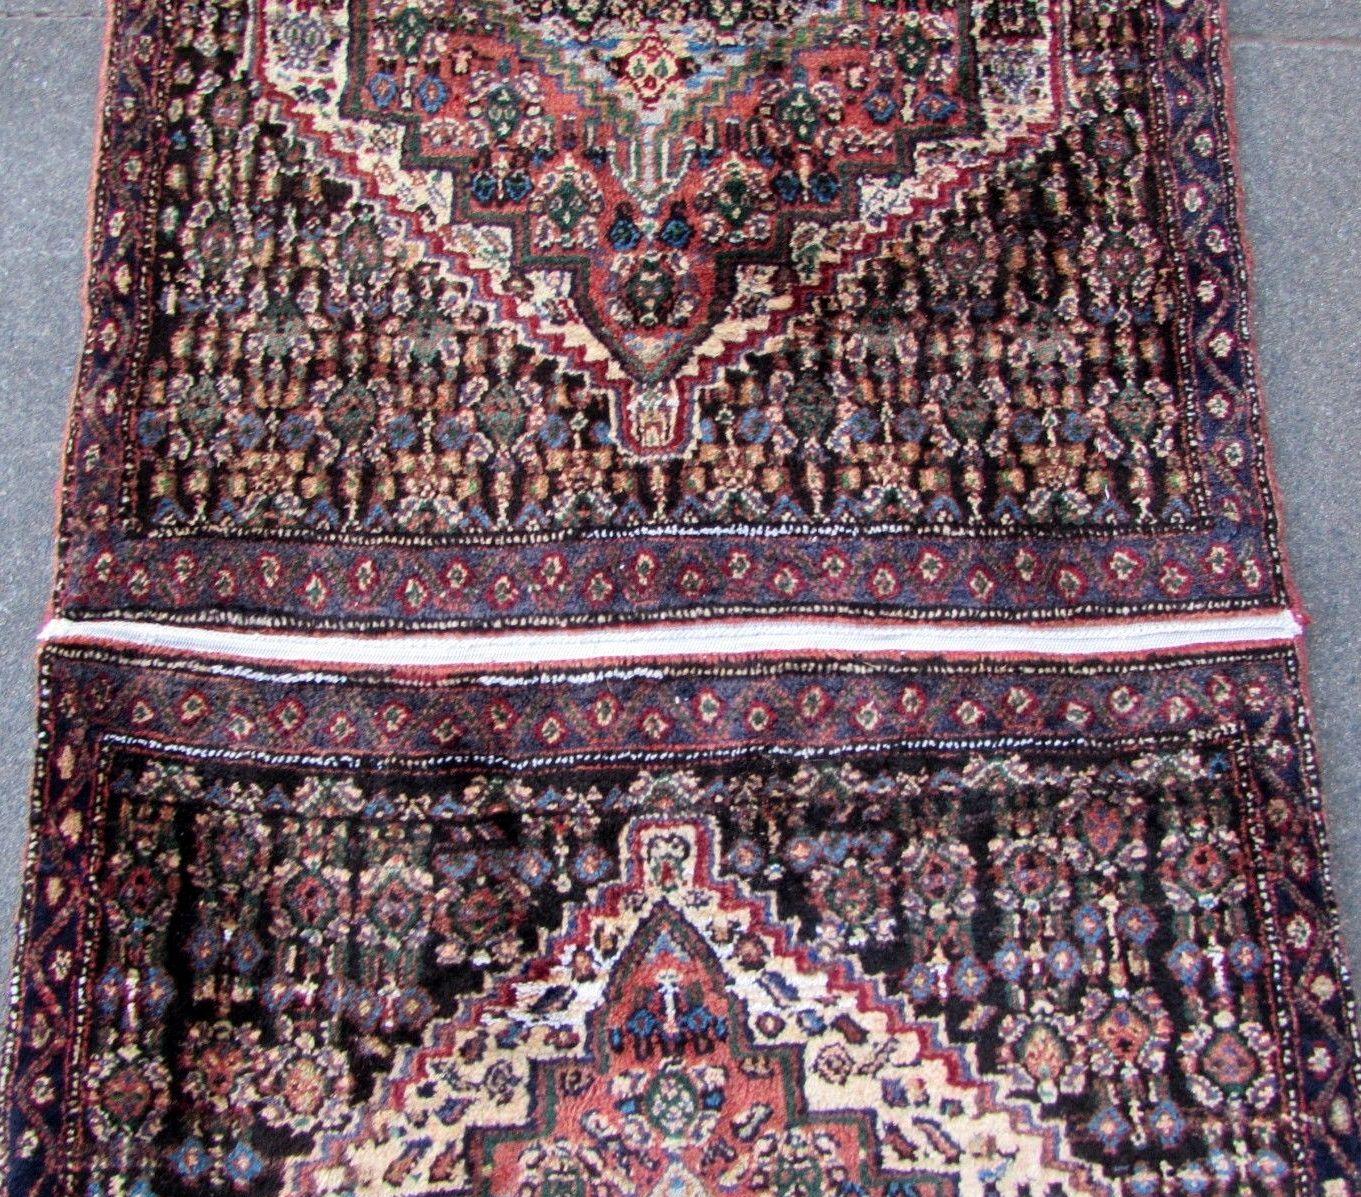 Handmade vintage Senneh runner made out of two smaller rugs. The rug is in original good condition, it is from the mid-20th century.

- Condition: original good,

- circa 1950s,

- Size: 2.6' x 6.5' (76cm x 192cm),

- Material: wool,

-